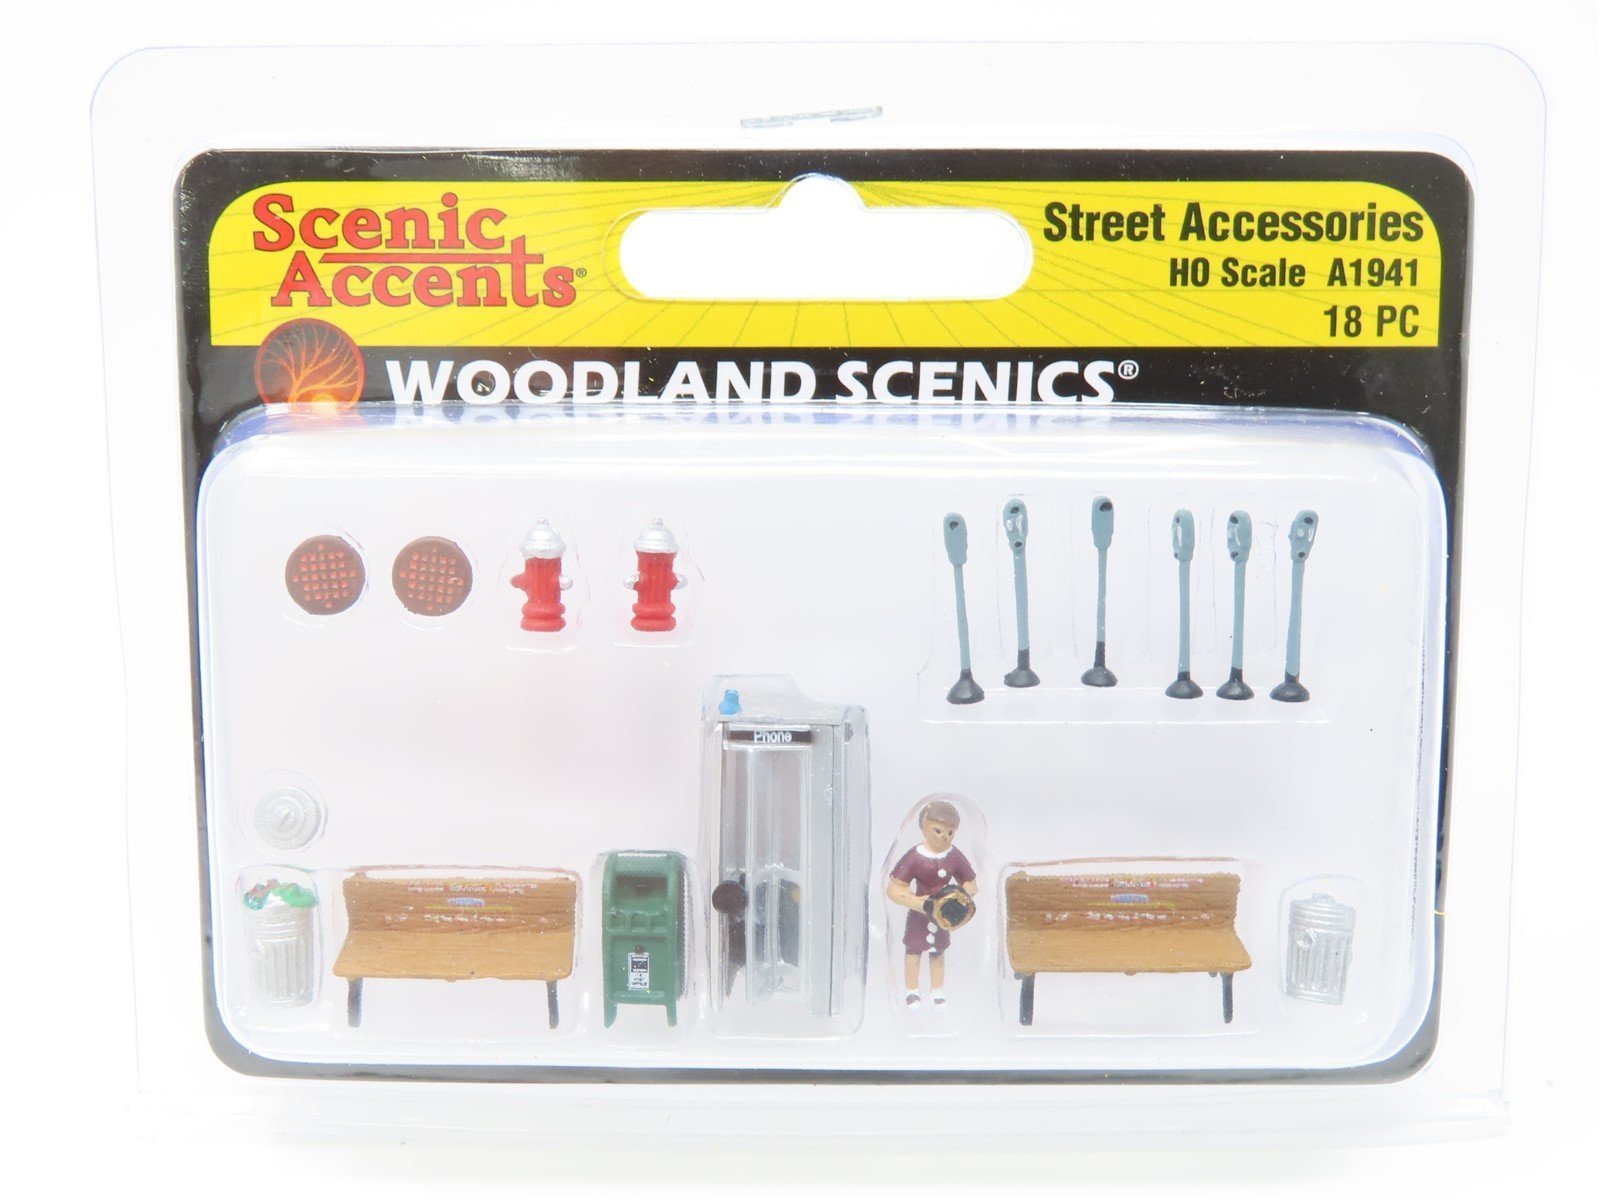 HO Scale Trains & Accessories Tagged ho scenery Page 2 - Model